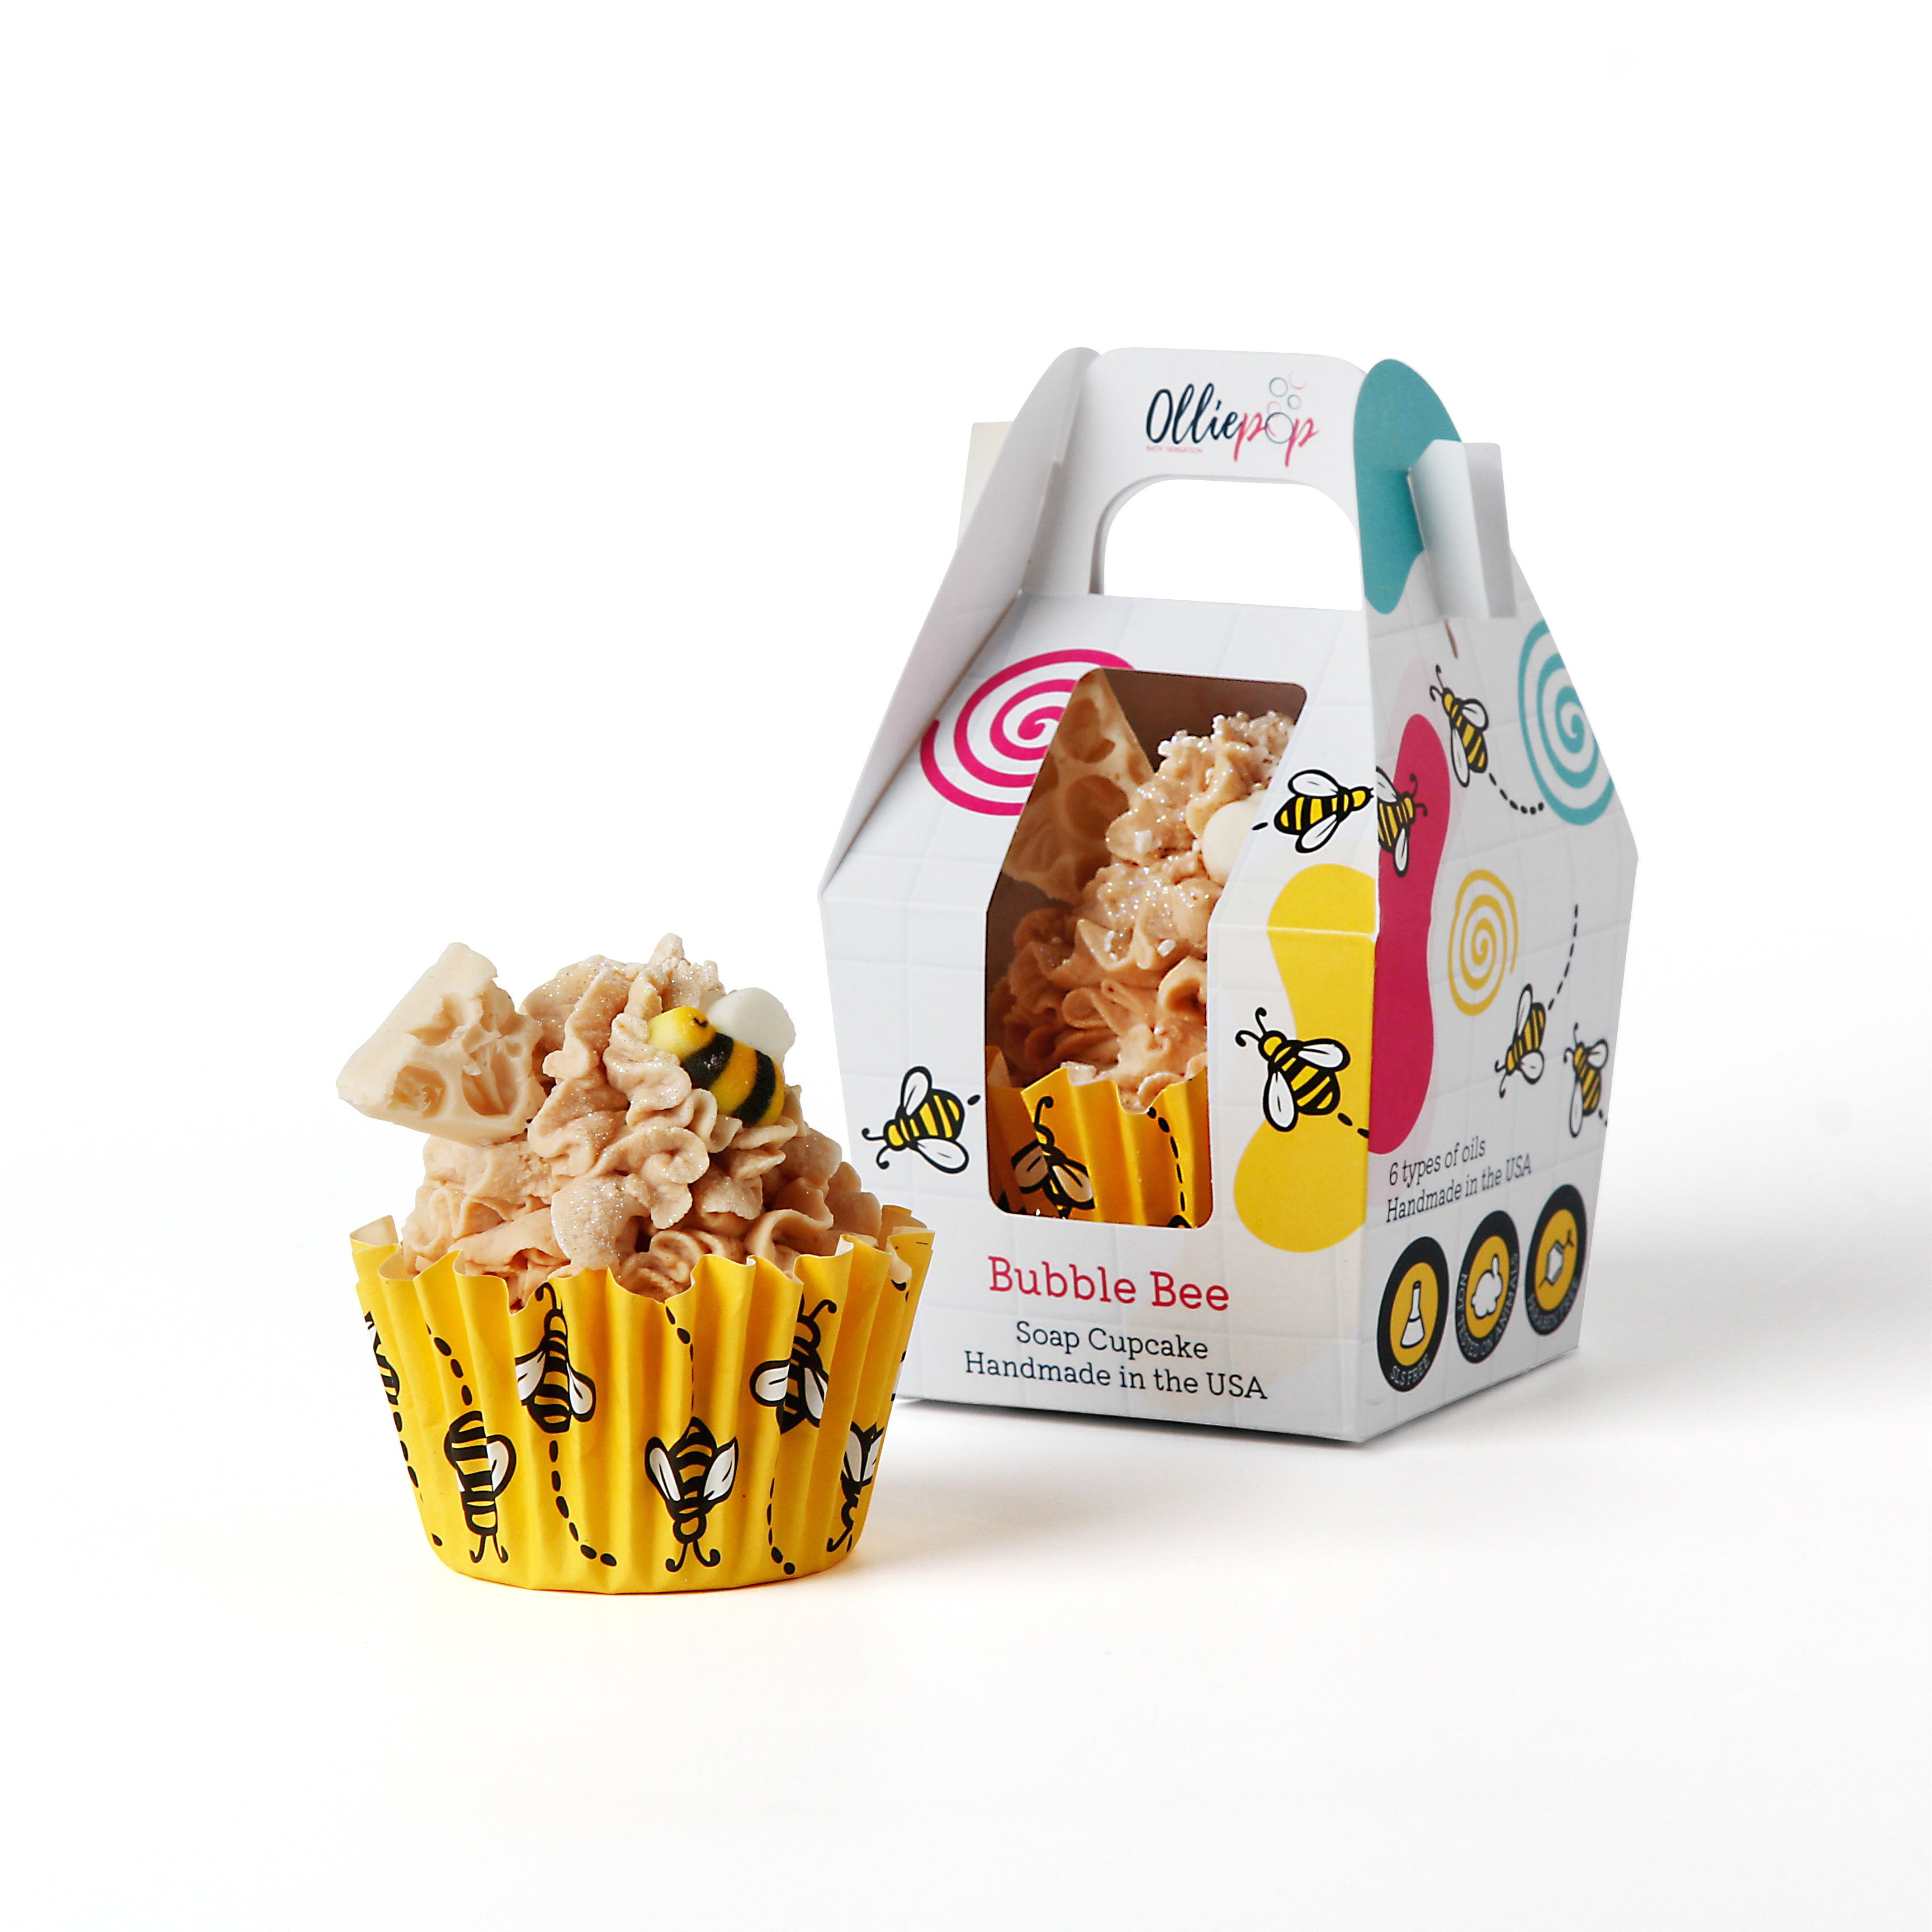 Bee themed soap cupcake, packaged with our customized Olliepop packaging that is perfect for gifts.